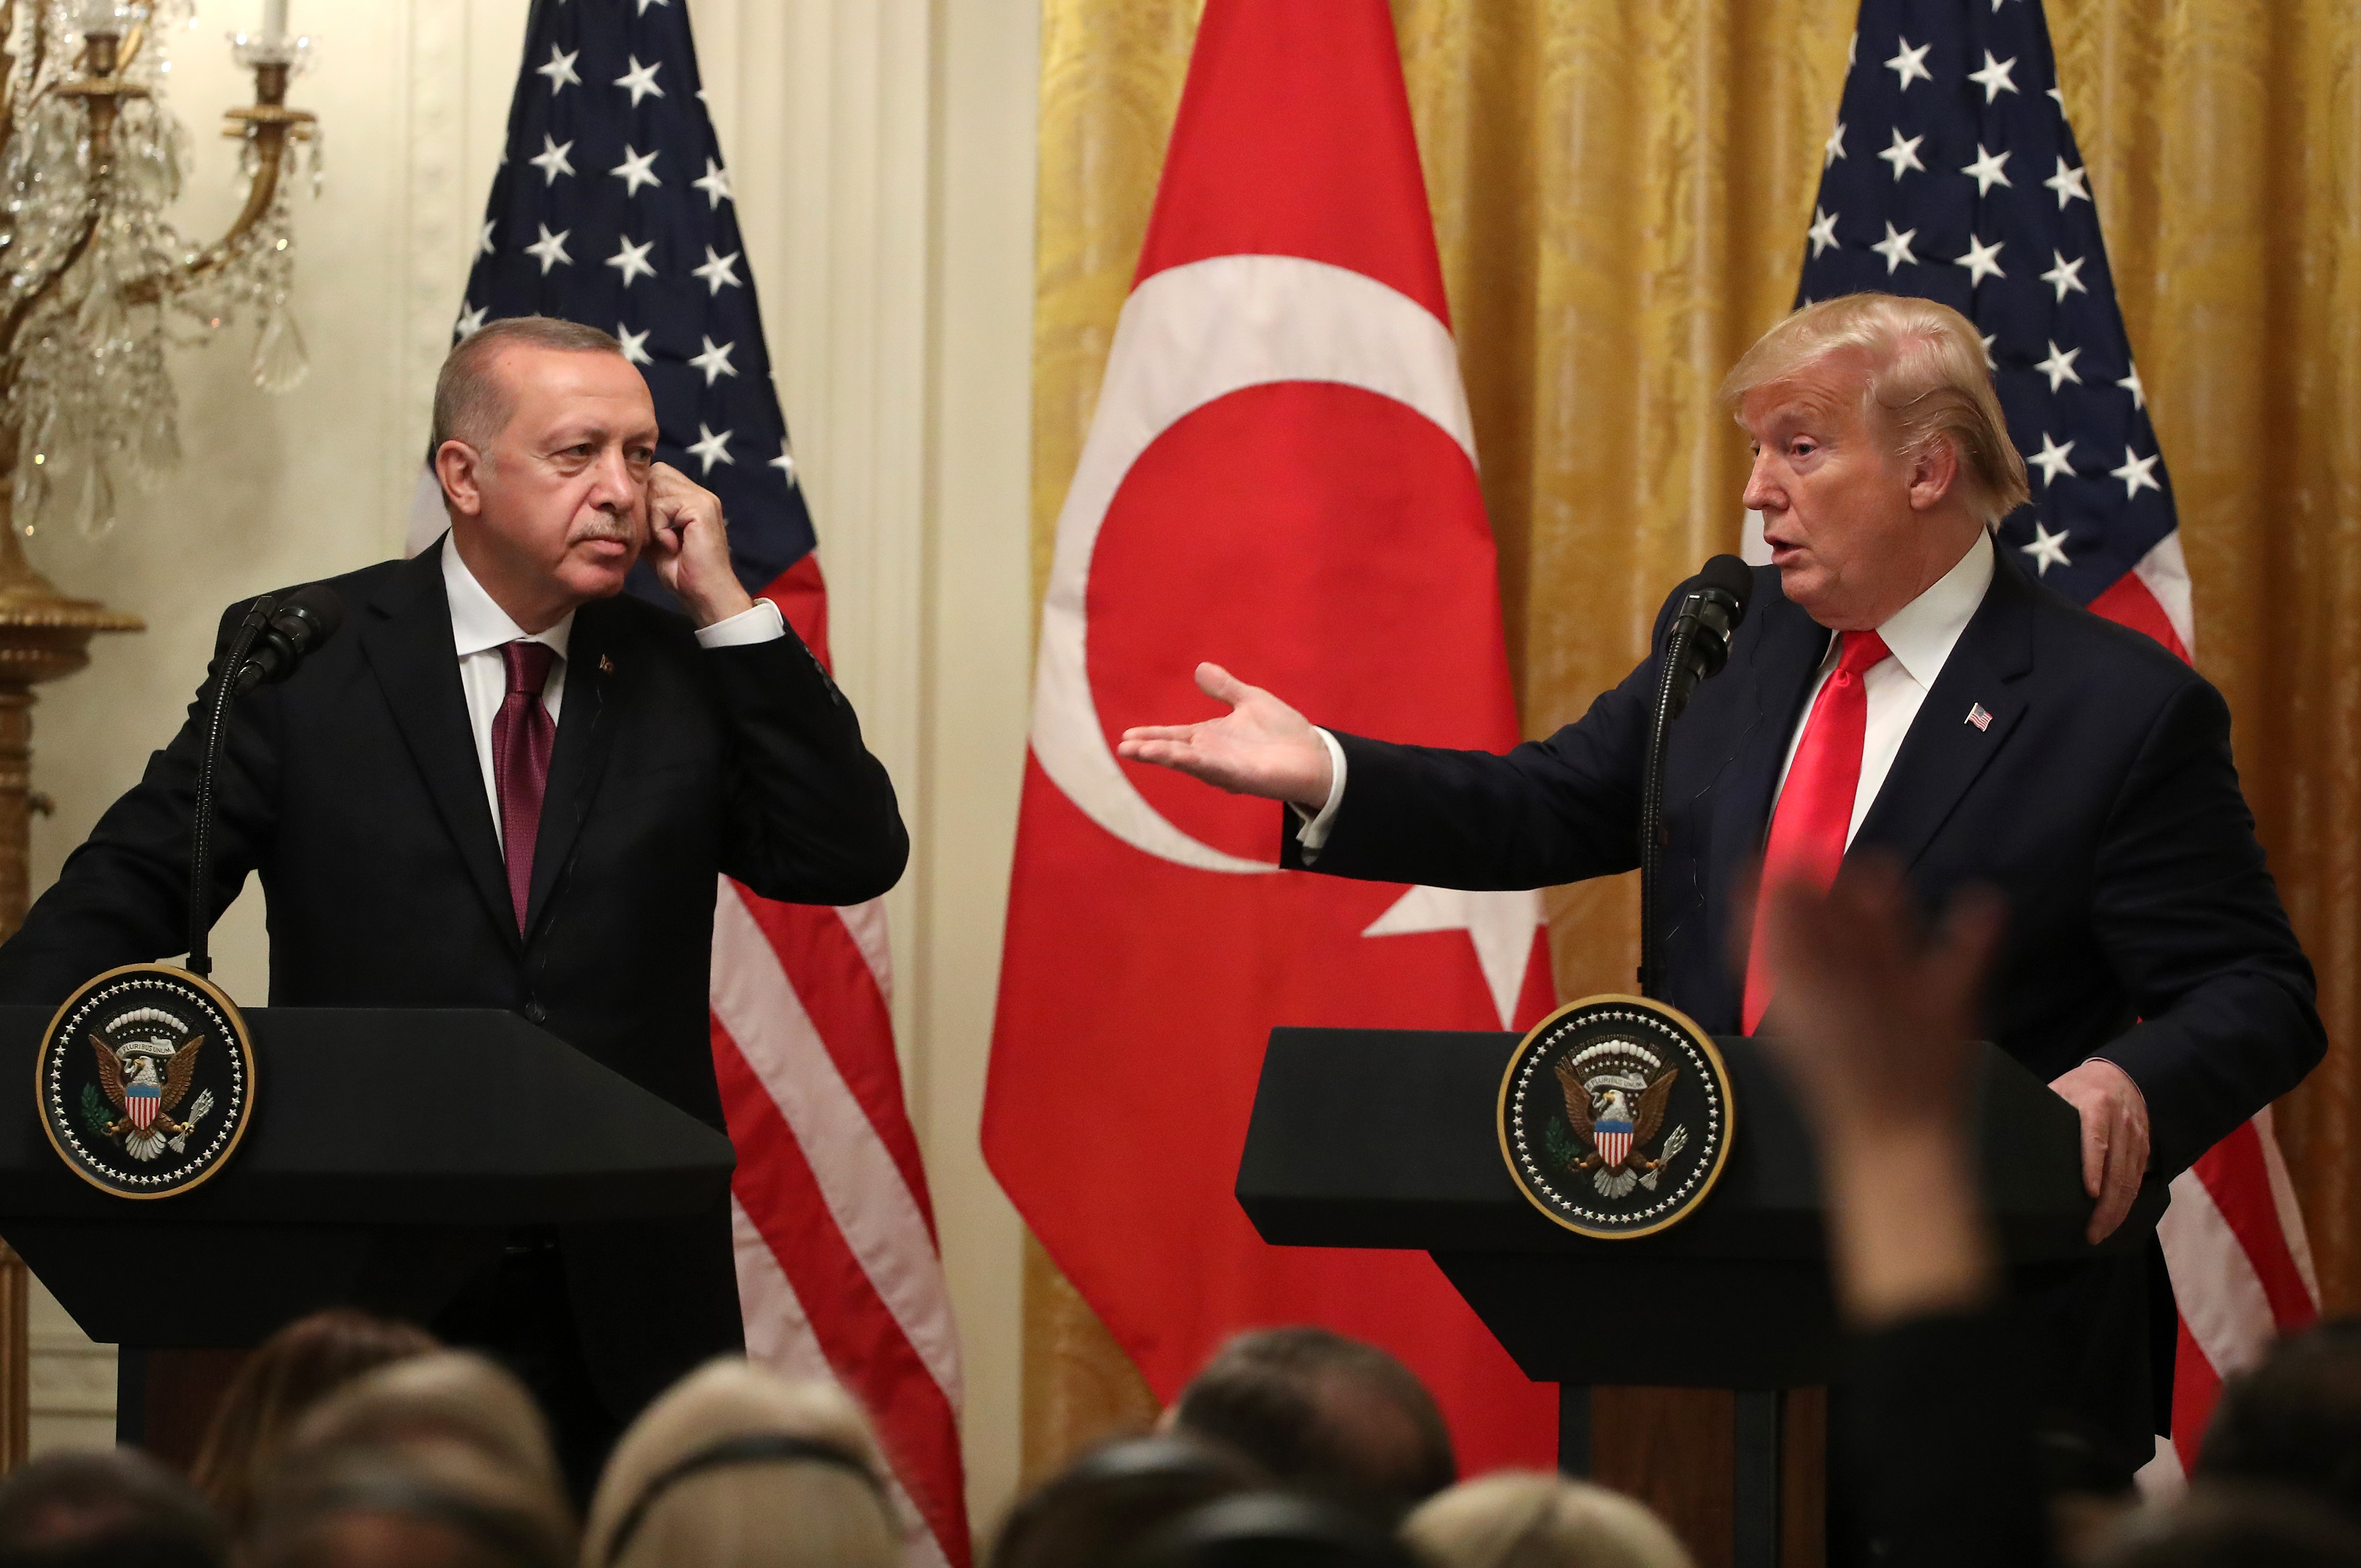 Trump showed he doesn’t understand Turkey — while standing next to Turkey’s president 1